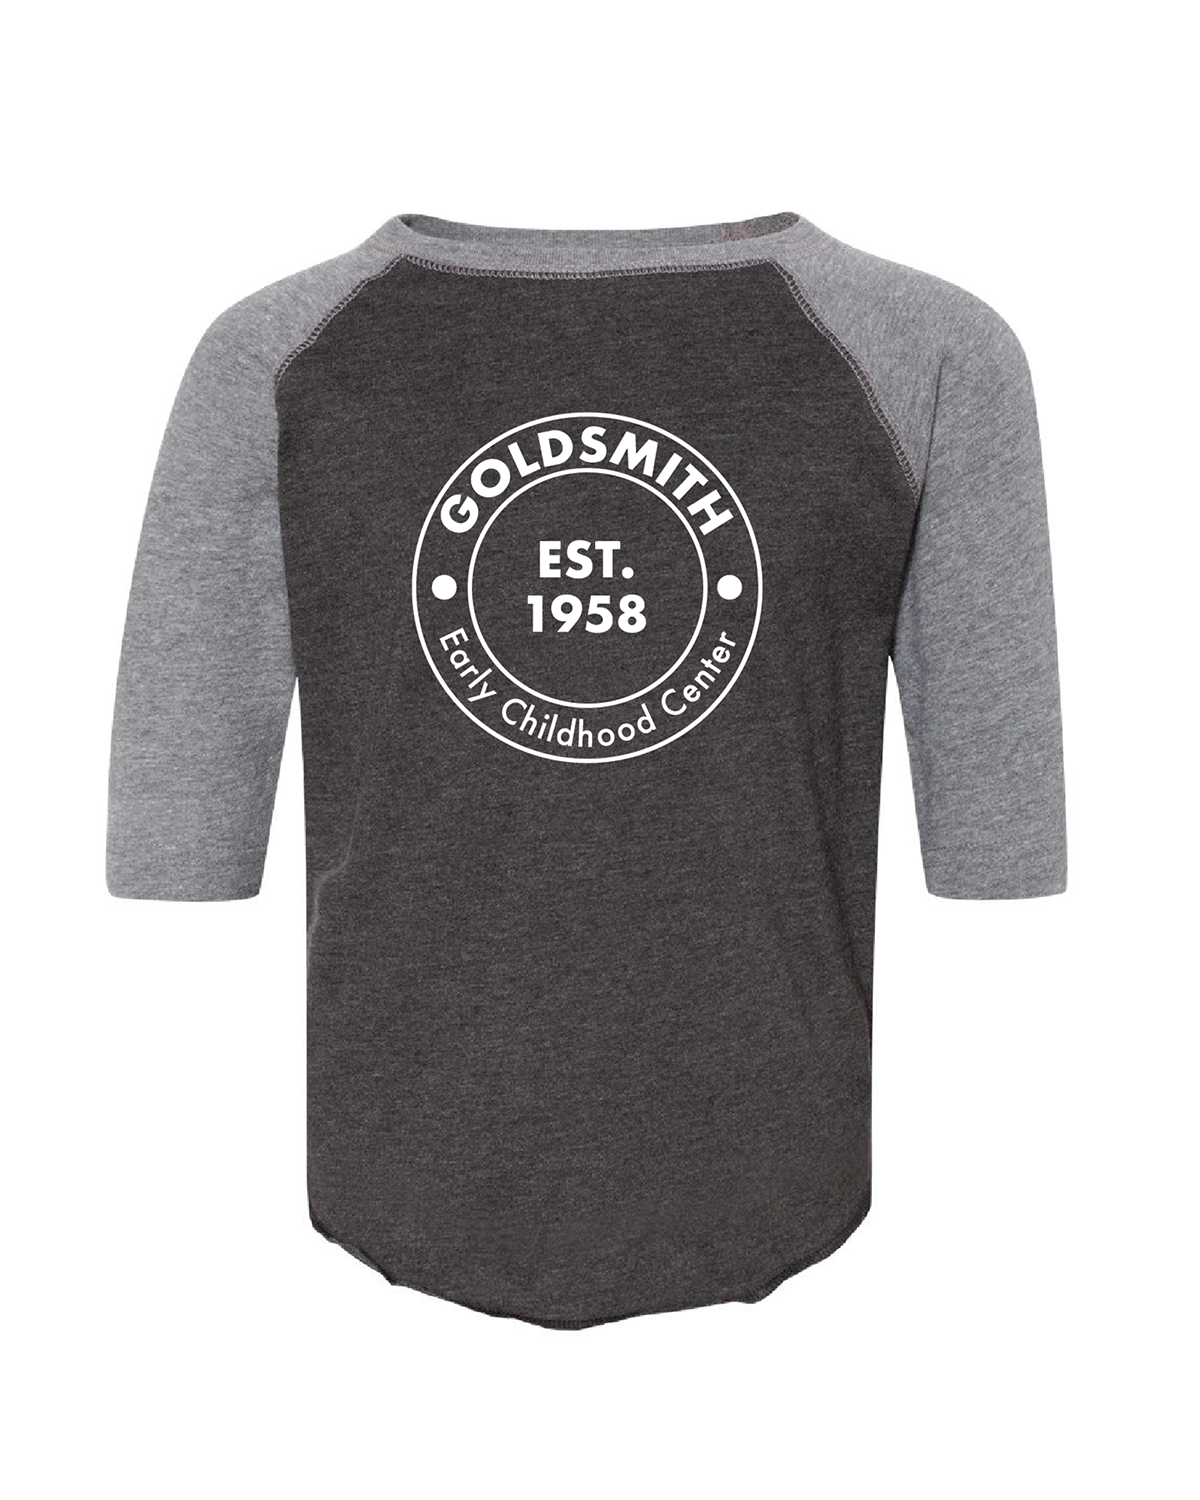 Adult Baseball Tee (Cotton Fine Jersey) with Round Logo